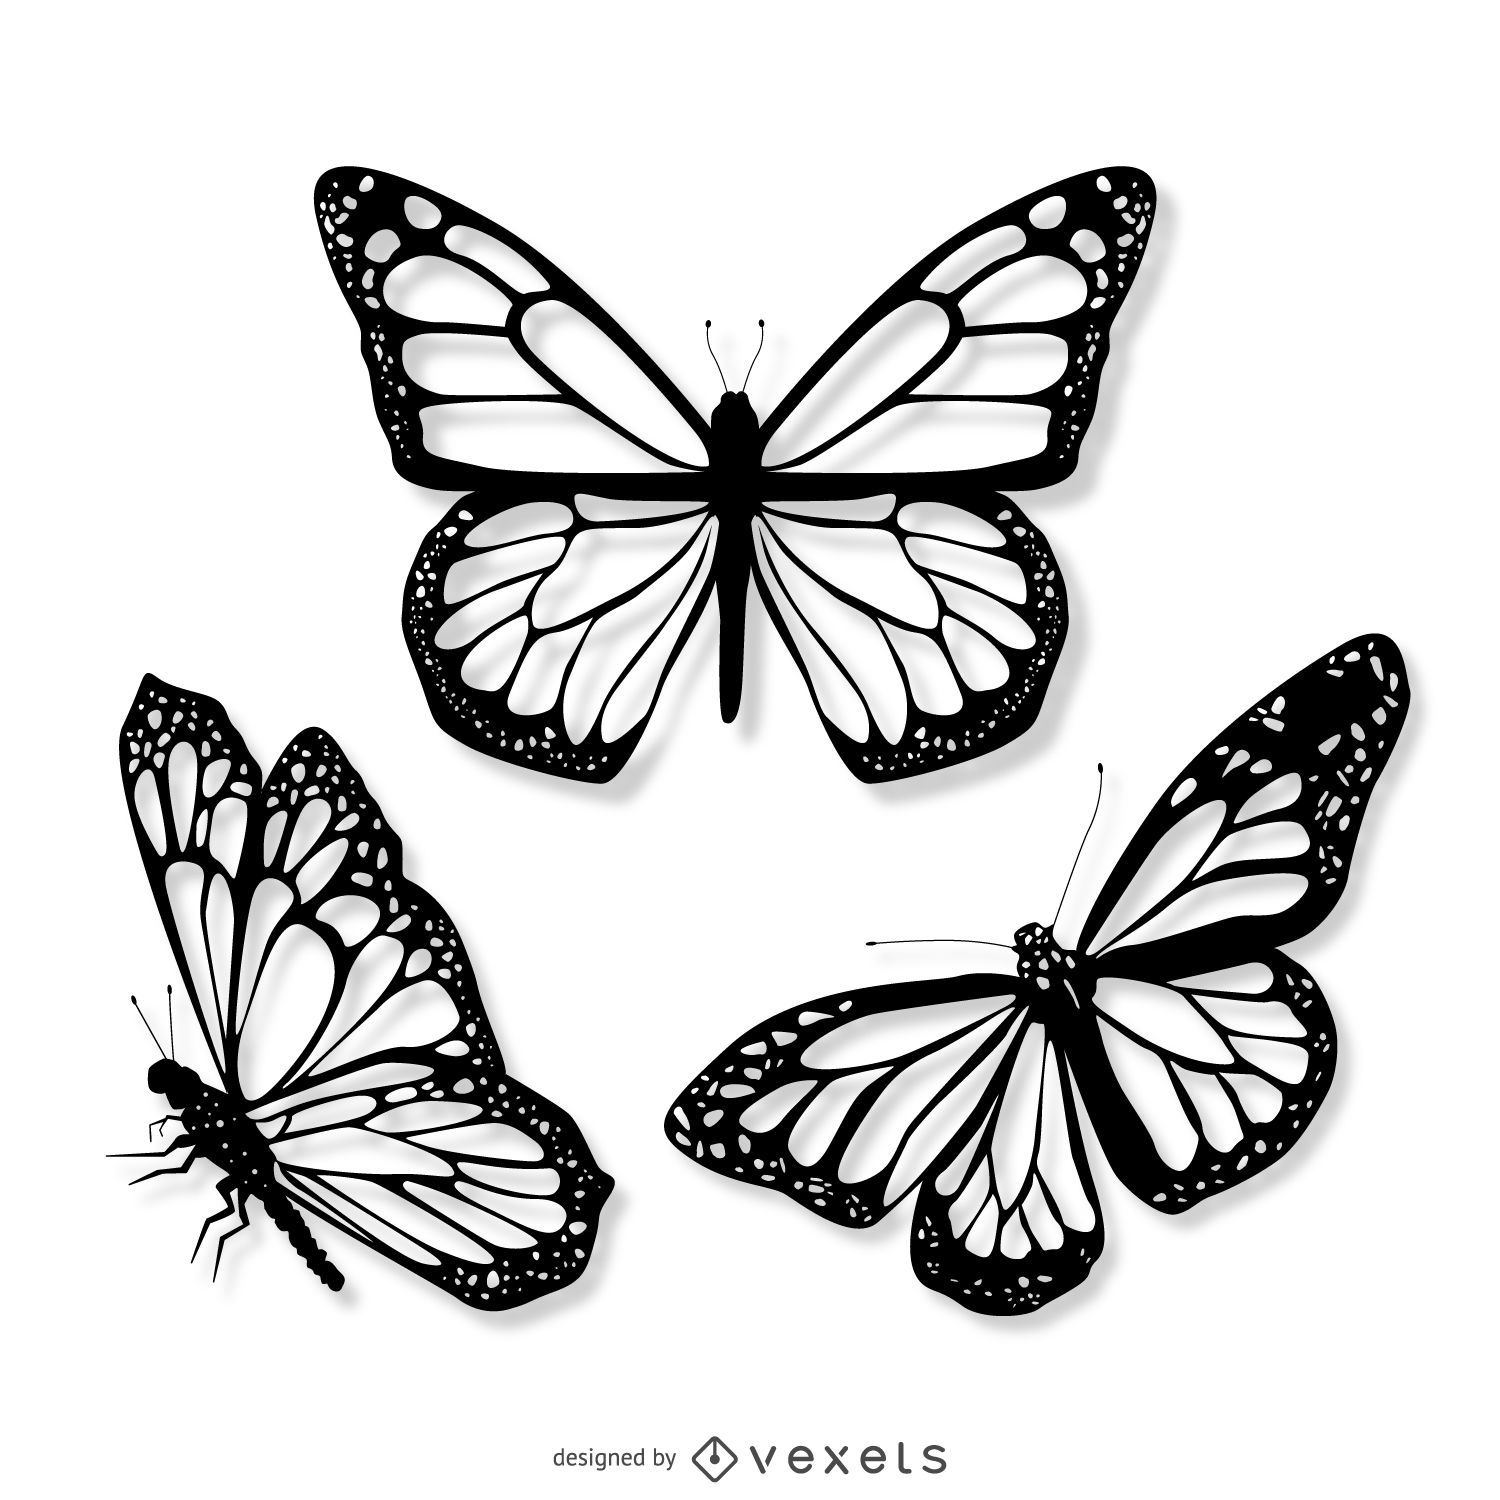 the butterfly downlid vector free illustration